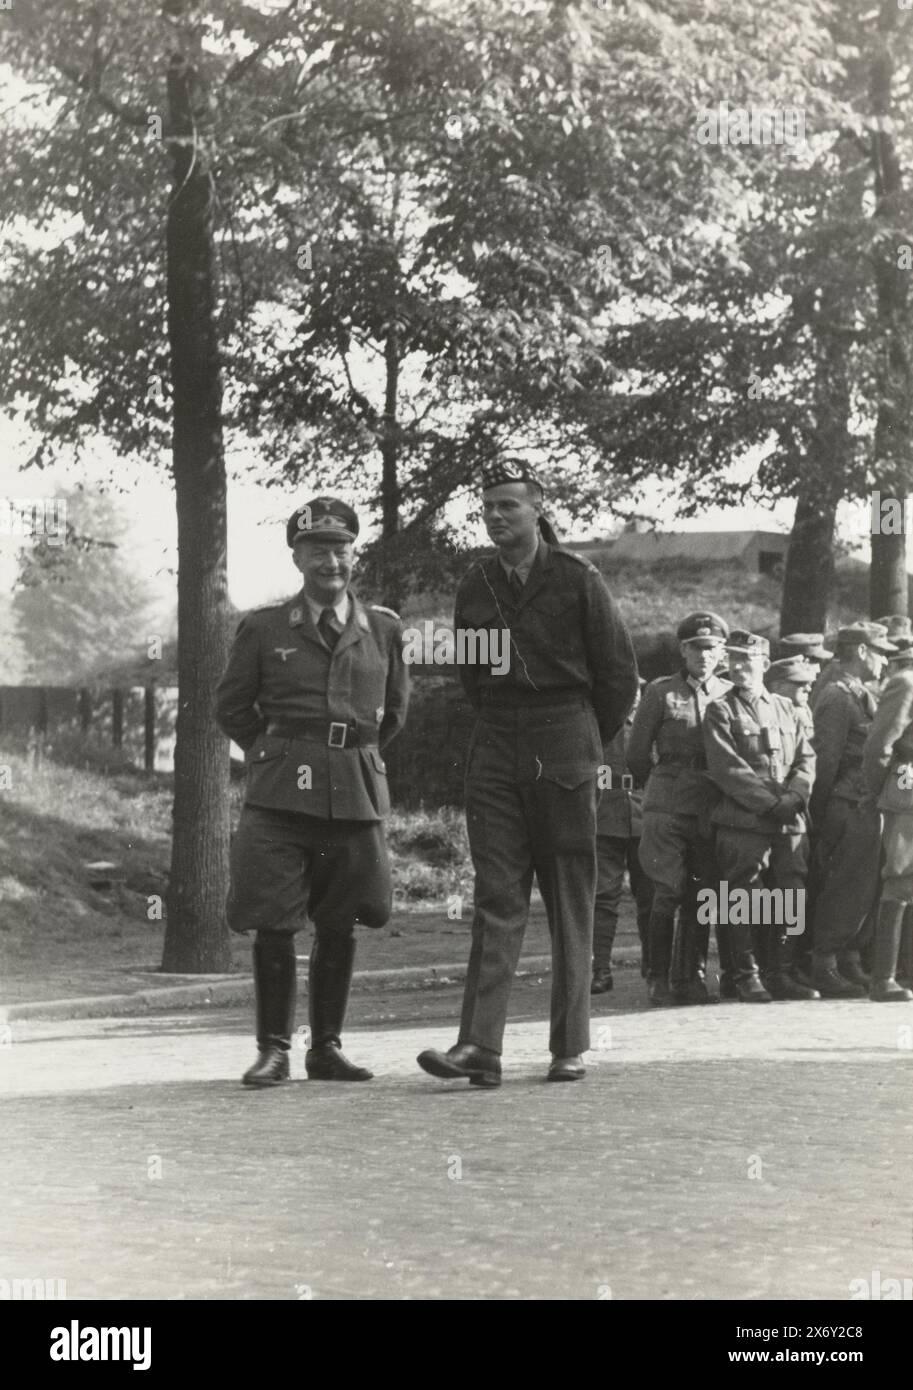 German prisoners of war, German prisoners of war guarded by English? soldiers. On the left, a senior Luftwaffe officer, next to him an Allied soldier. Prisoners of war in the background., photograph, anonymous, Netherlands, May-1945, photographic support, height, 13 cm × width, 17.5 cm Stock Photo